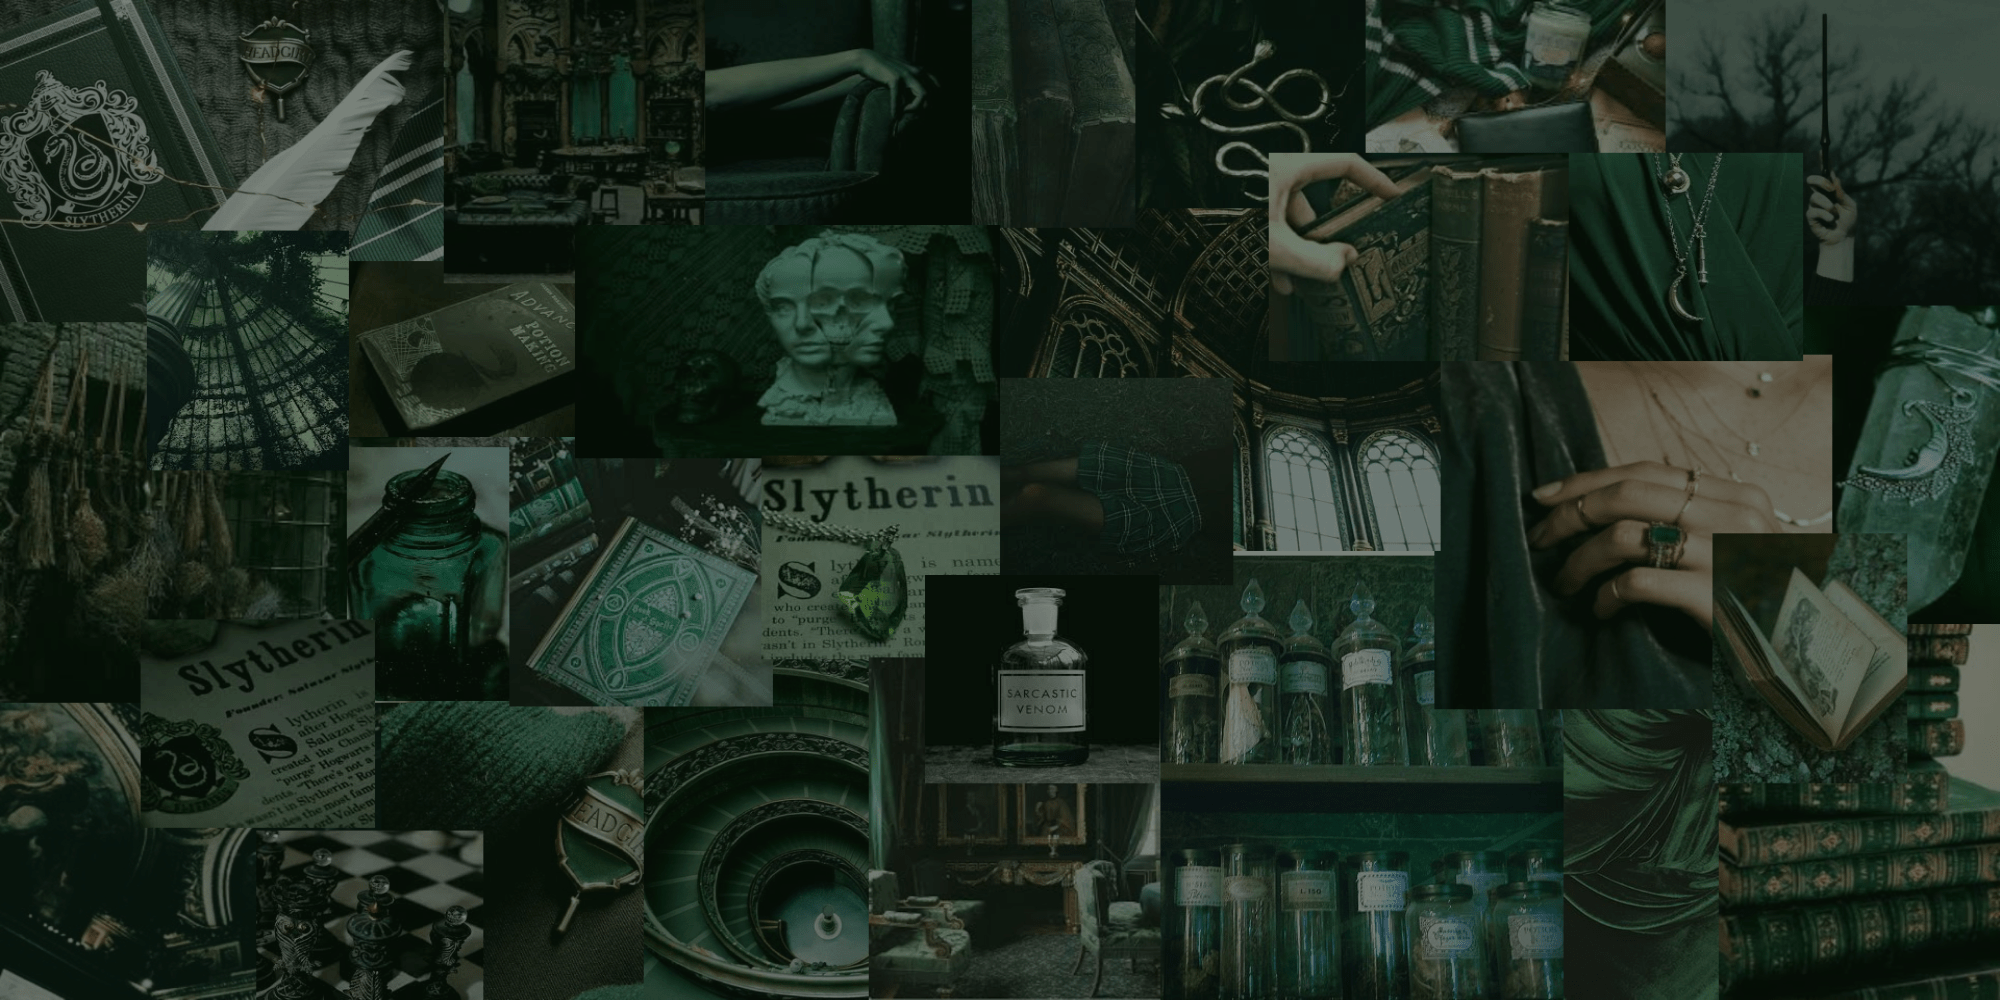 Aesthetic wallpaper for slytherin. - Slytherin